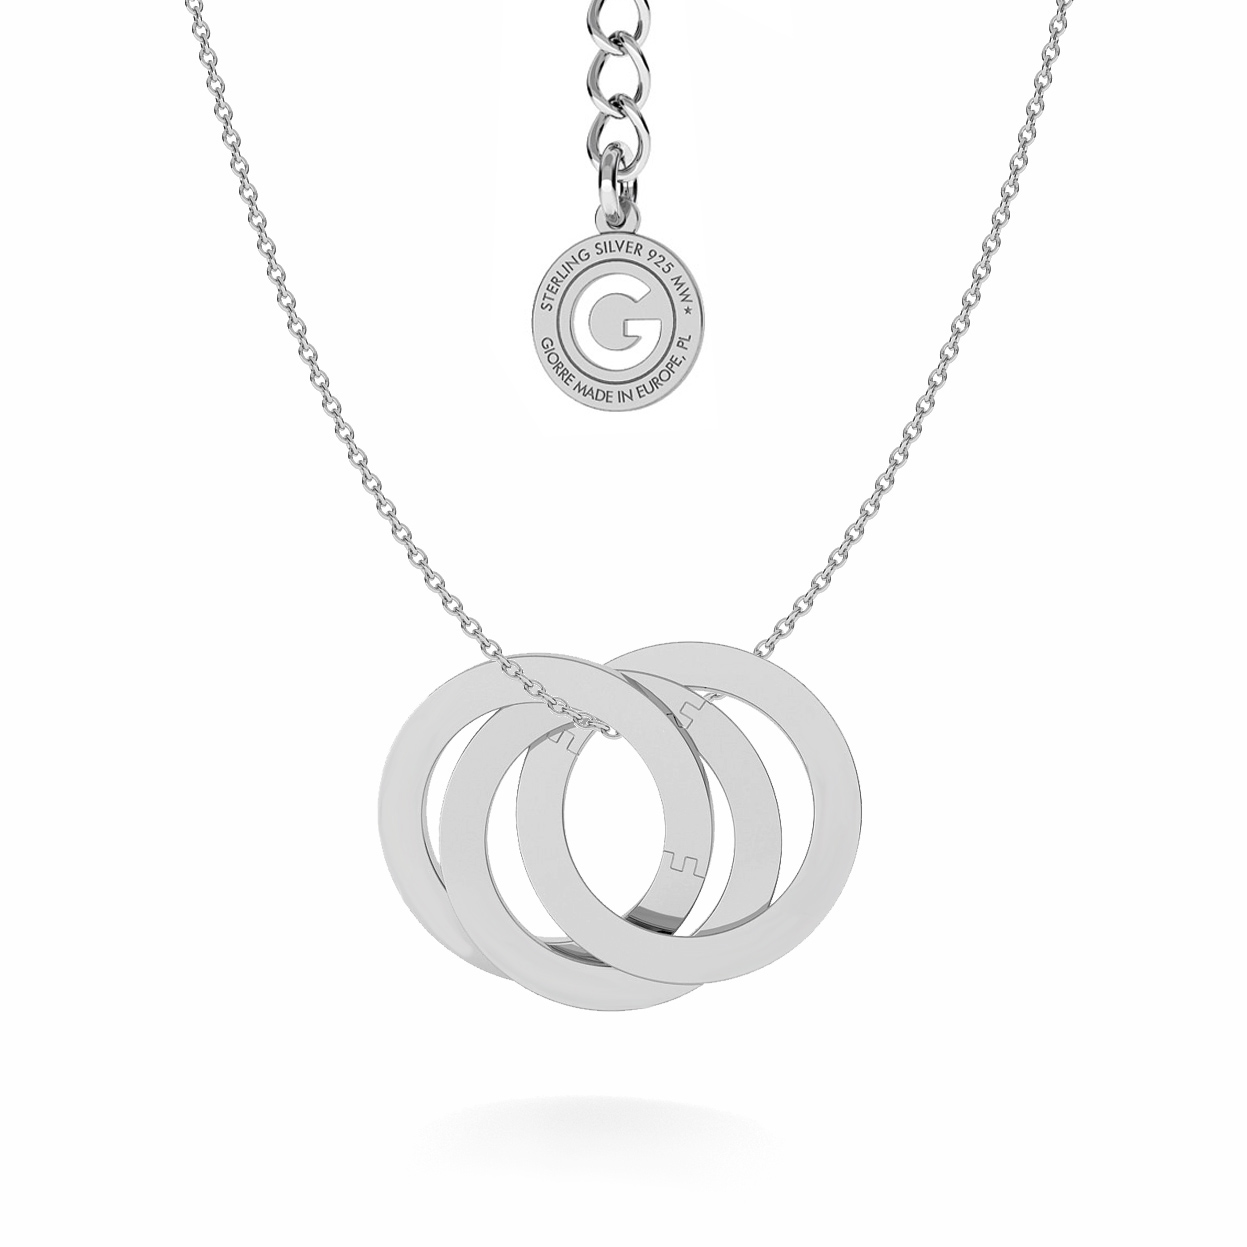 SILVER SISTER NECKLACE, STERLING SILVER 925